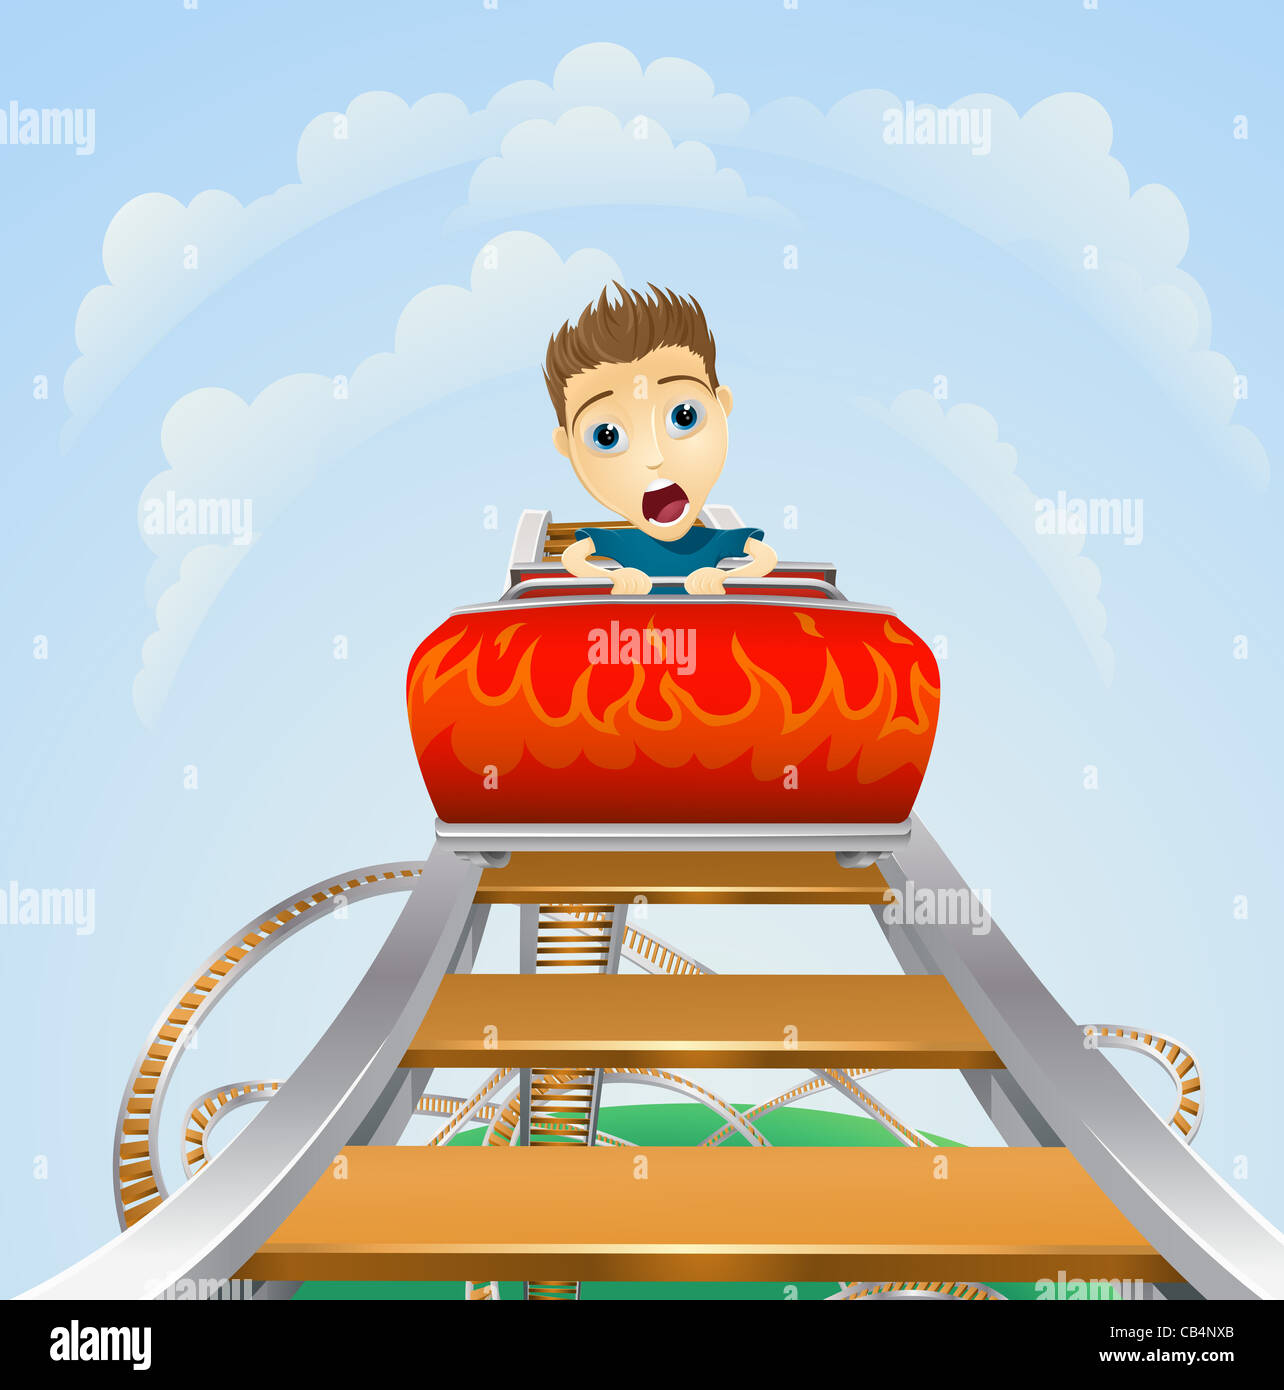 Cartoon of a young boy or man looking terrified on a roller coaster ride Stock Photo